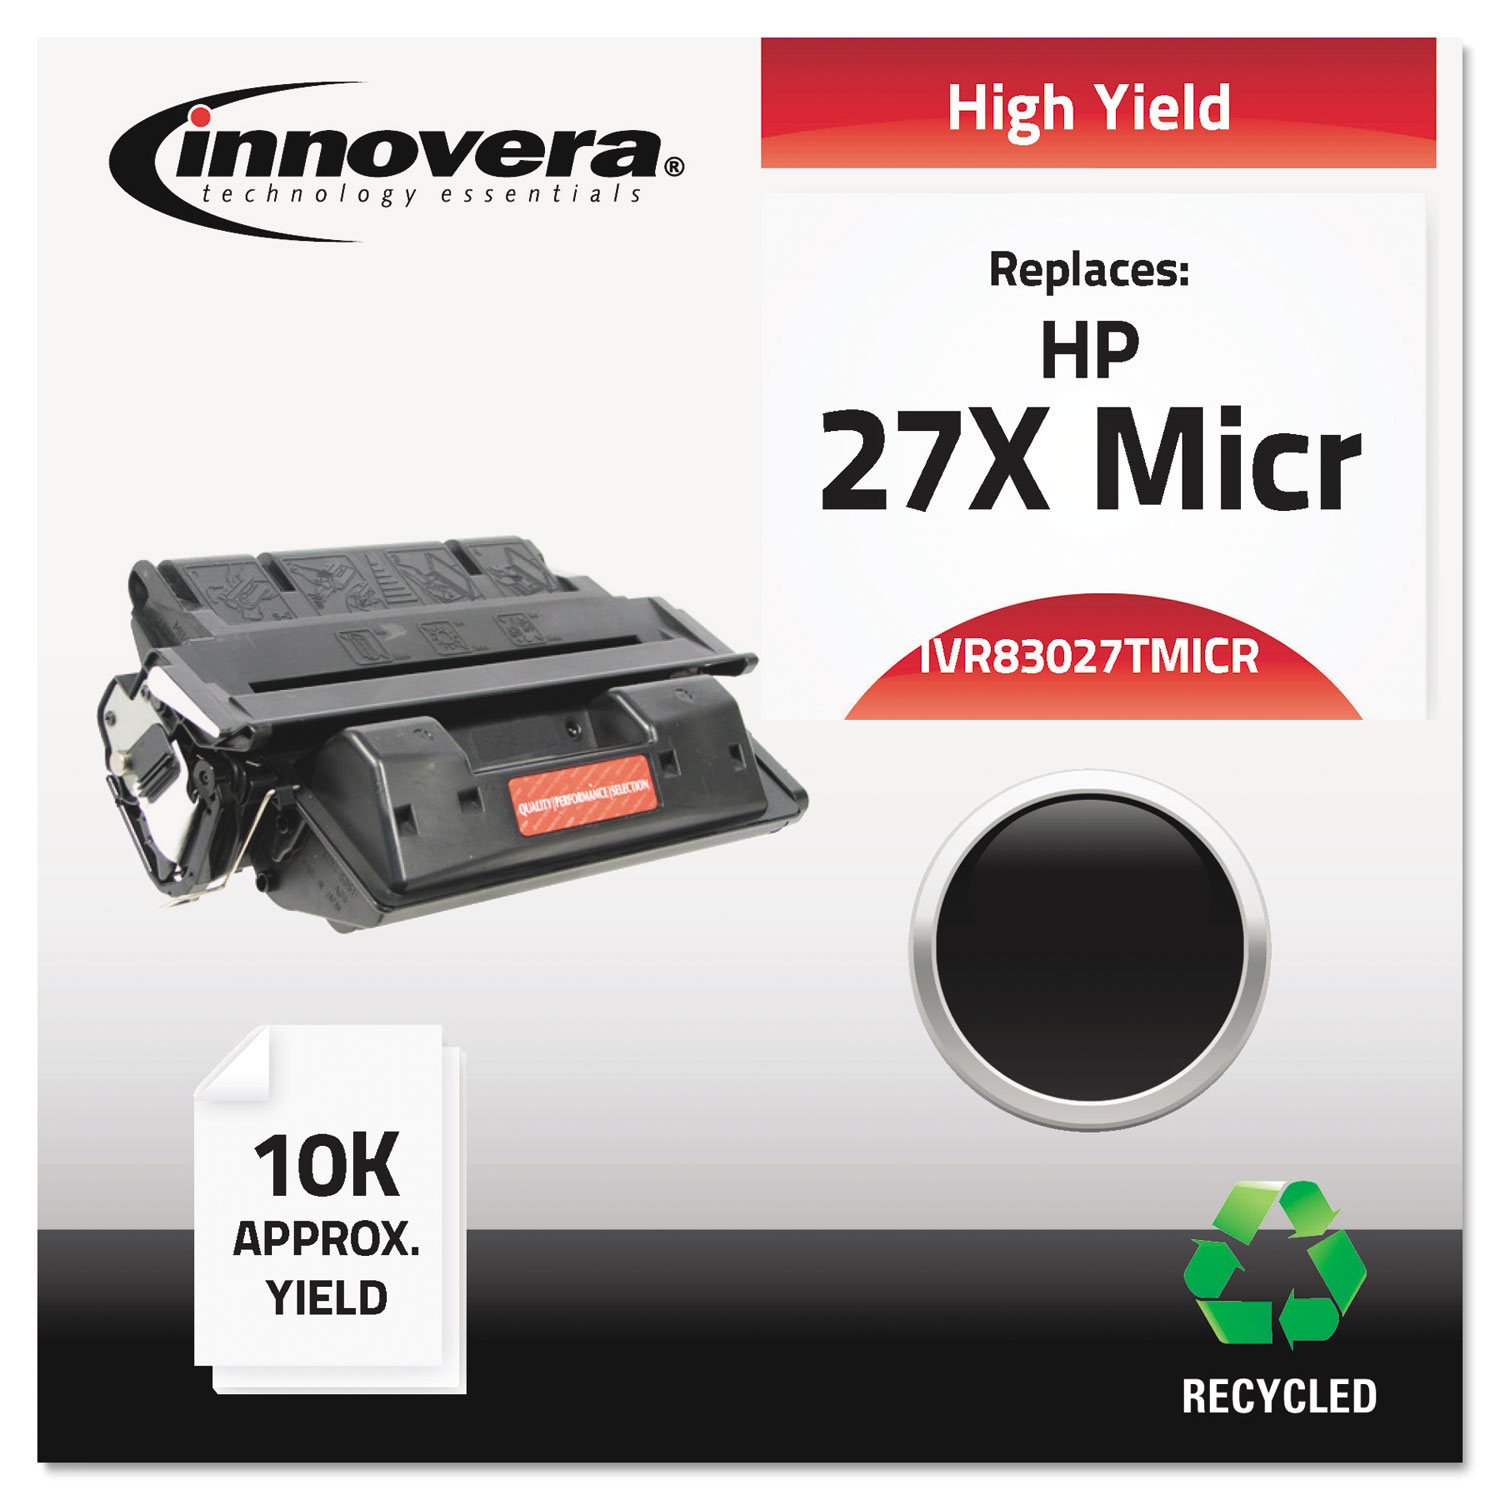 Remanufactured C4127X(M) (27XM) High-Yield MICR Toner, 6000 Page-Yield, Black